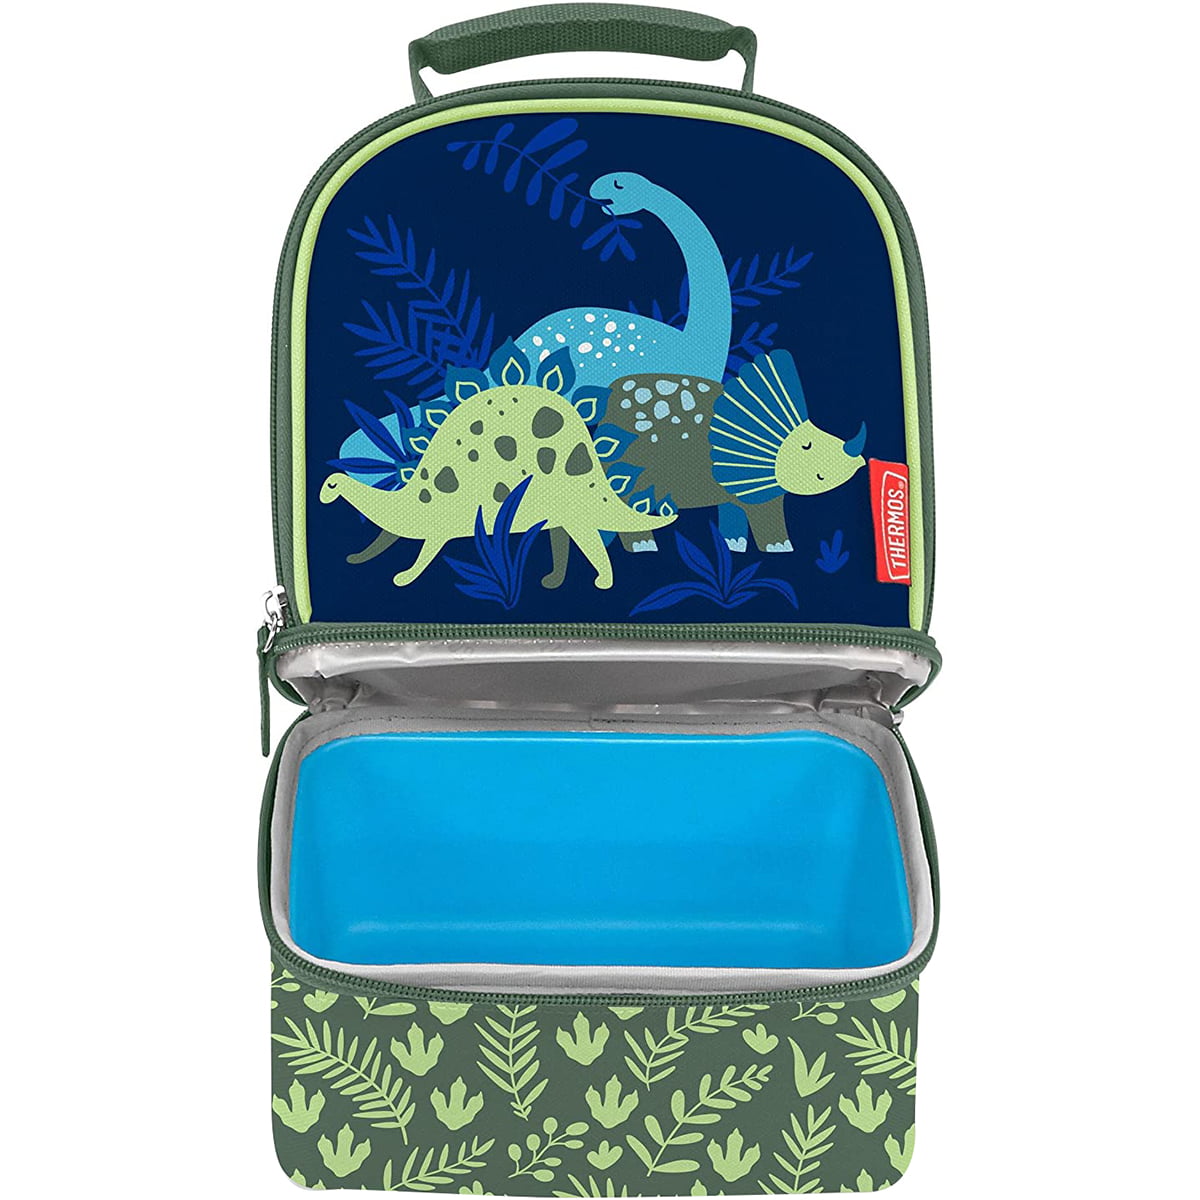 Thermos Dual Compartment Lunch Kit 9 34 H x 7 12 W x 5 D Shark